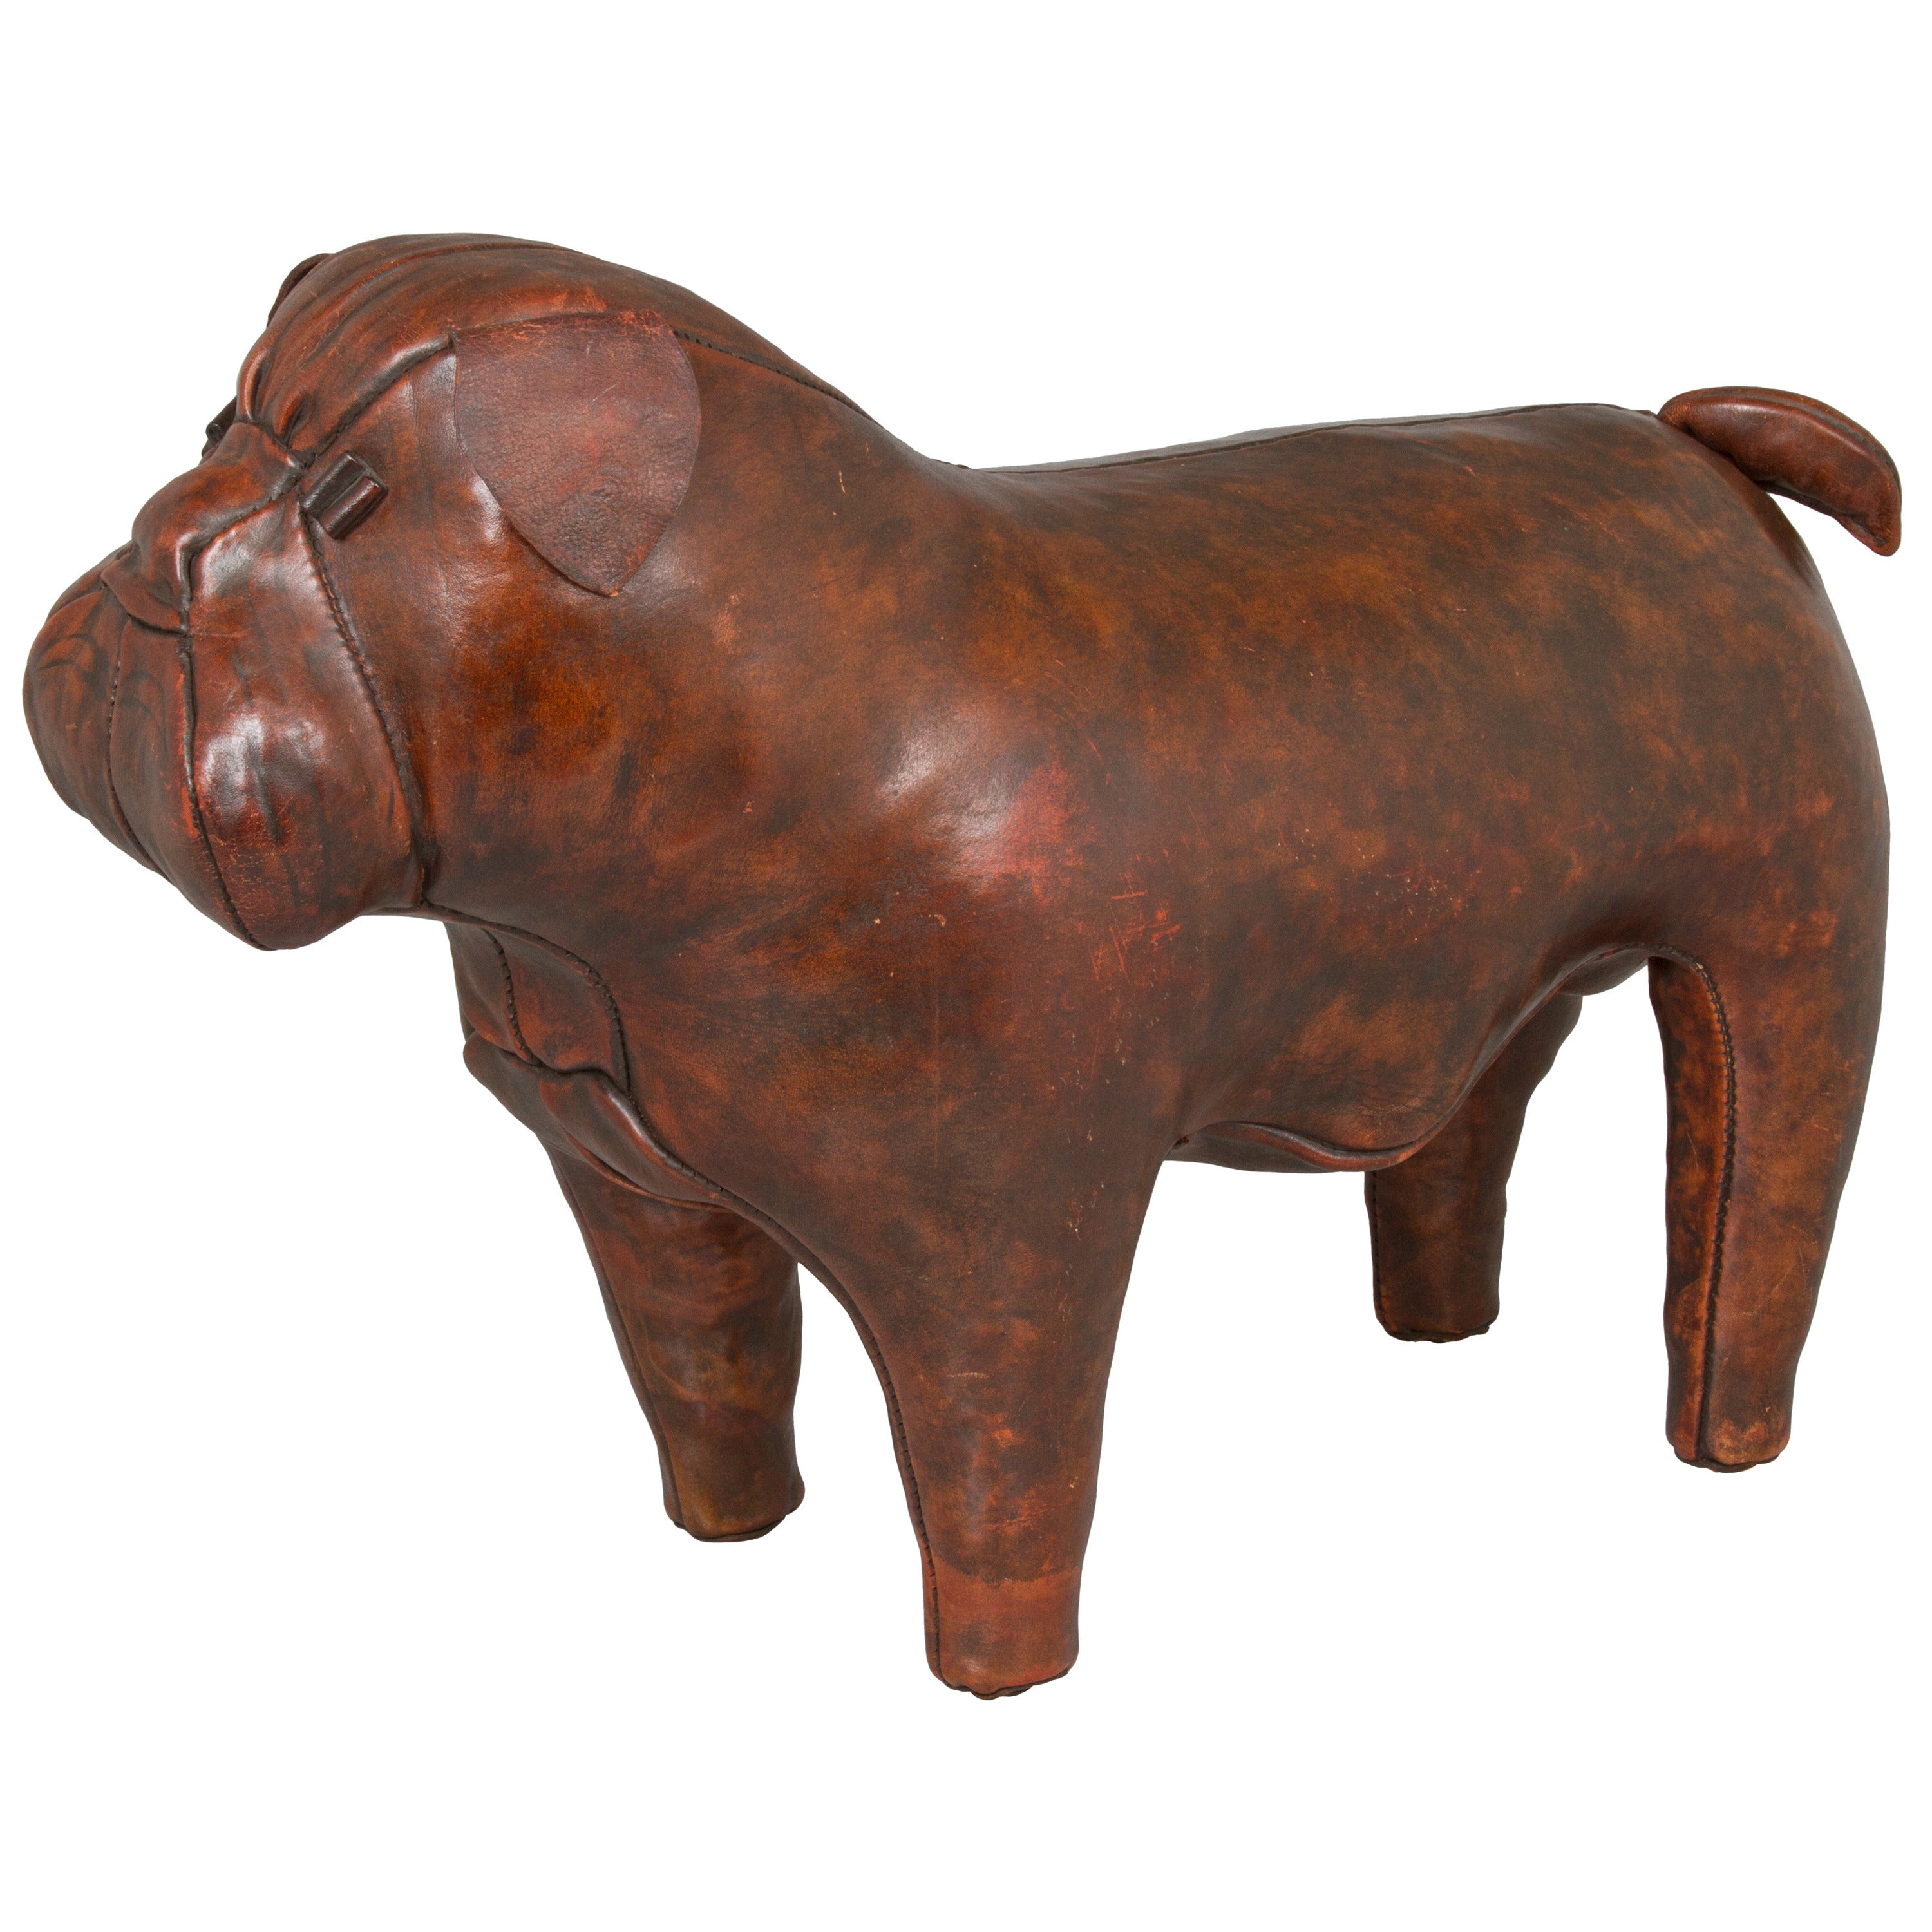 Vintage Bulldog Sculpture by Omersa for Abercrombie & Fitch For Sale